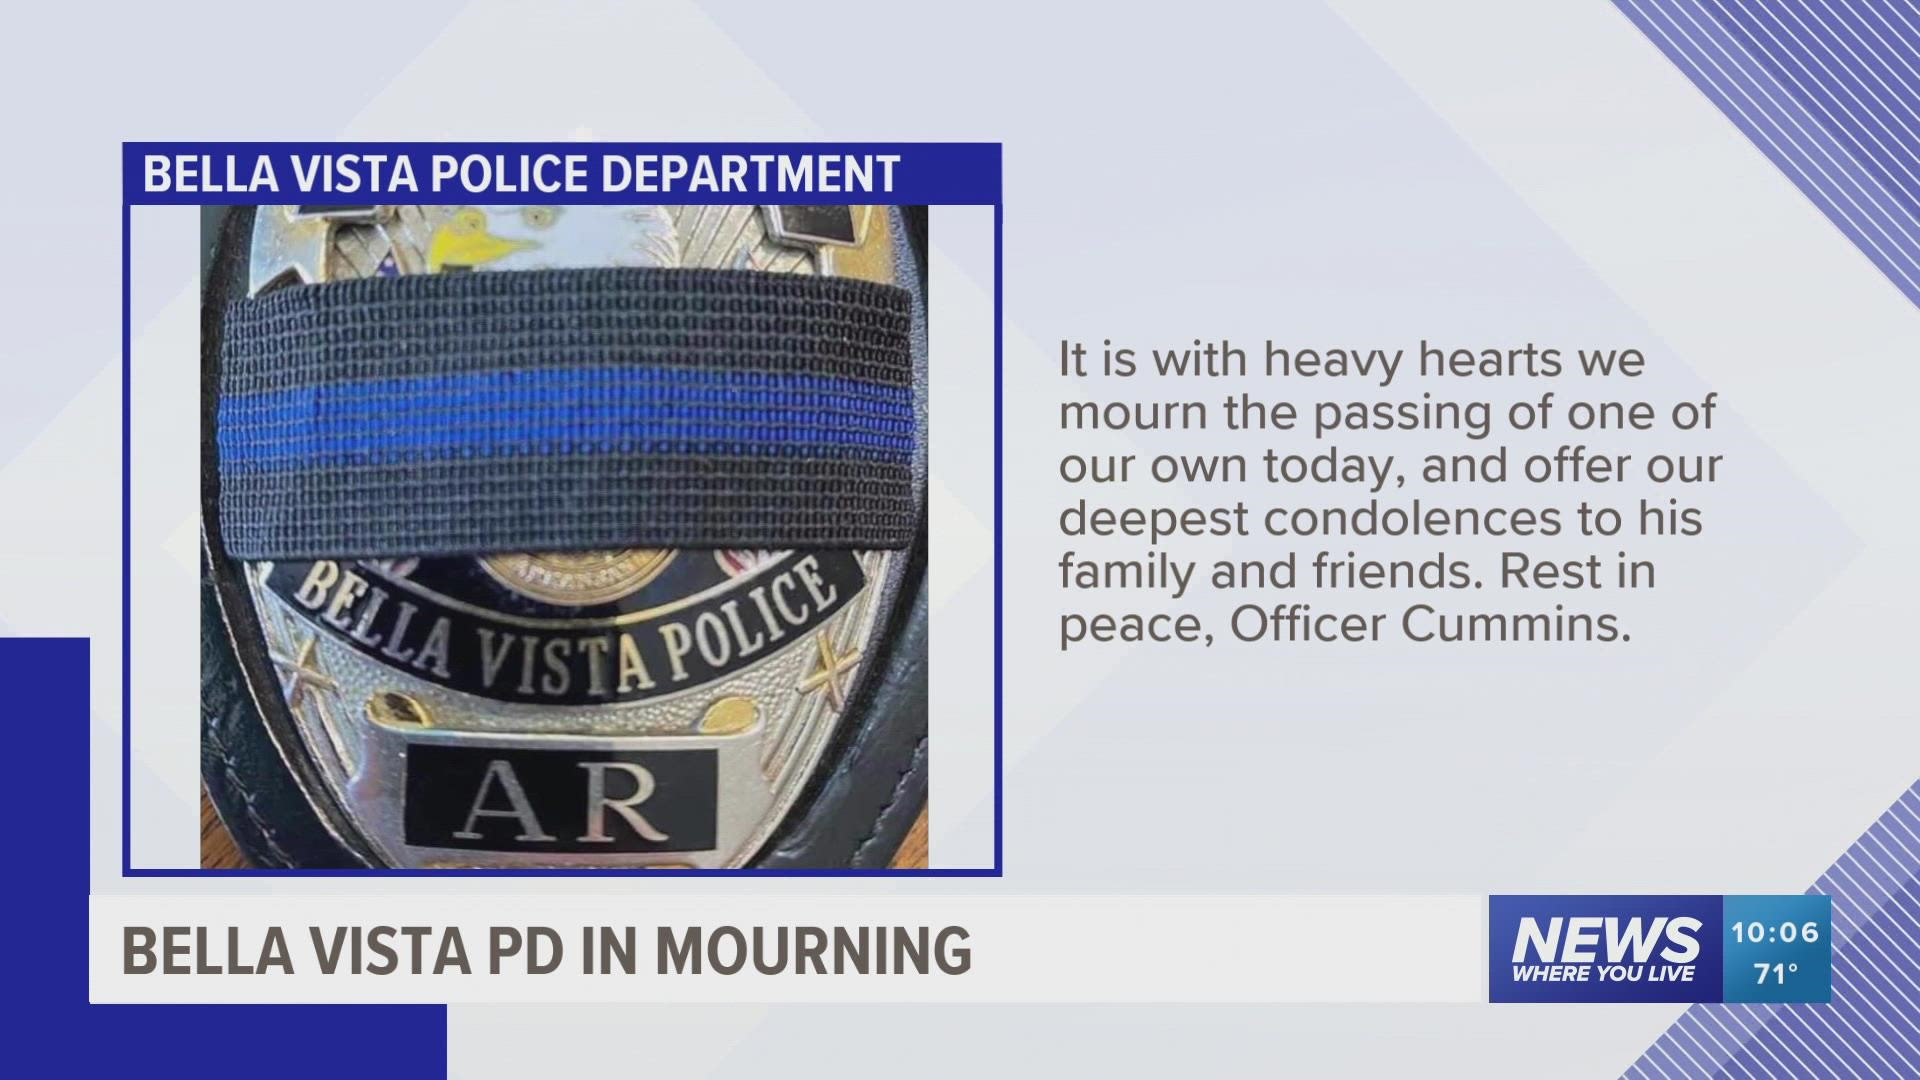 The Bella Vista Police Department is mourning the loss of Officer Cummins.